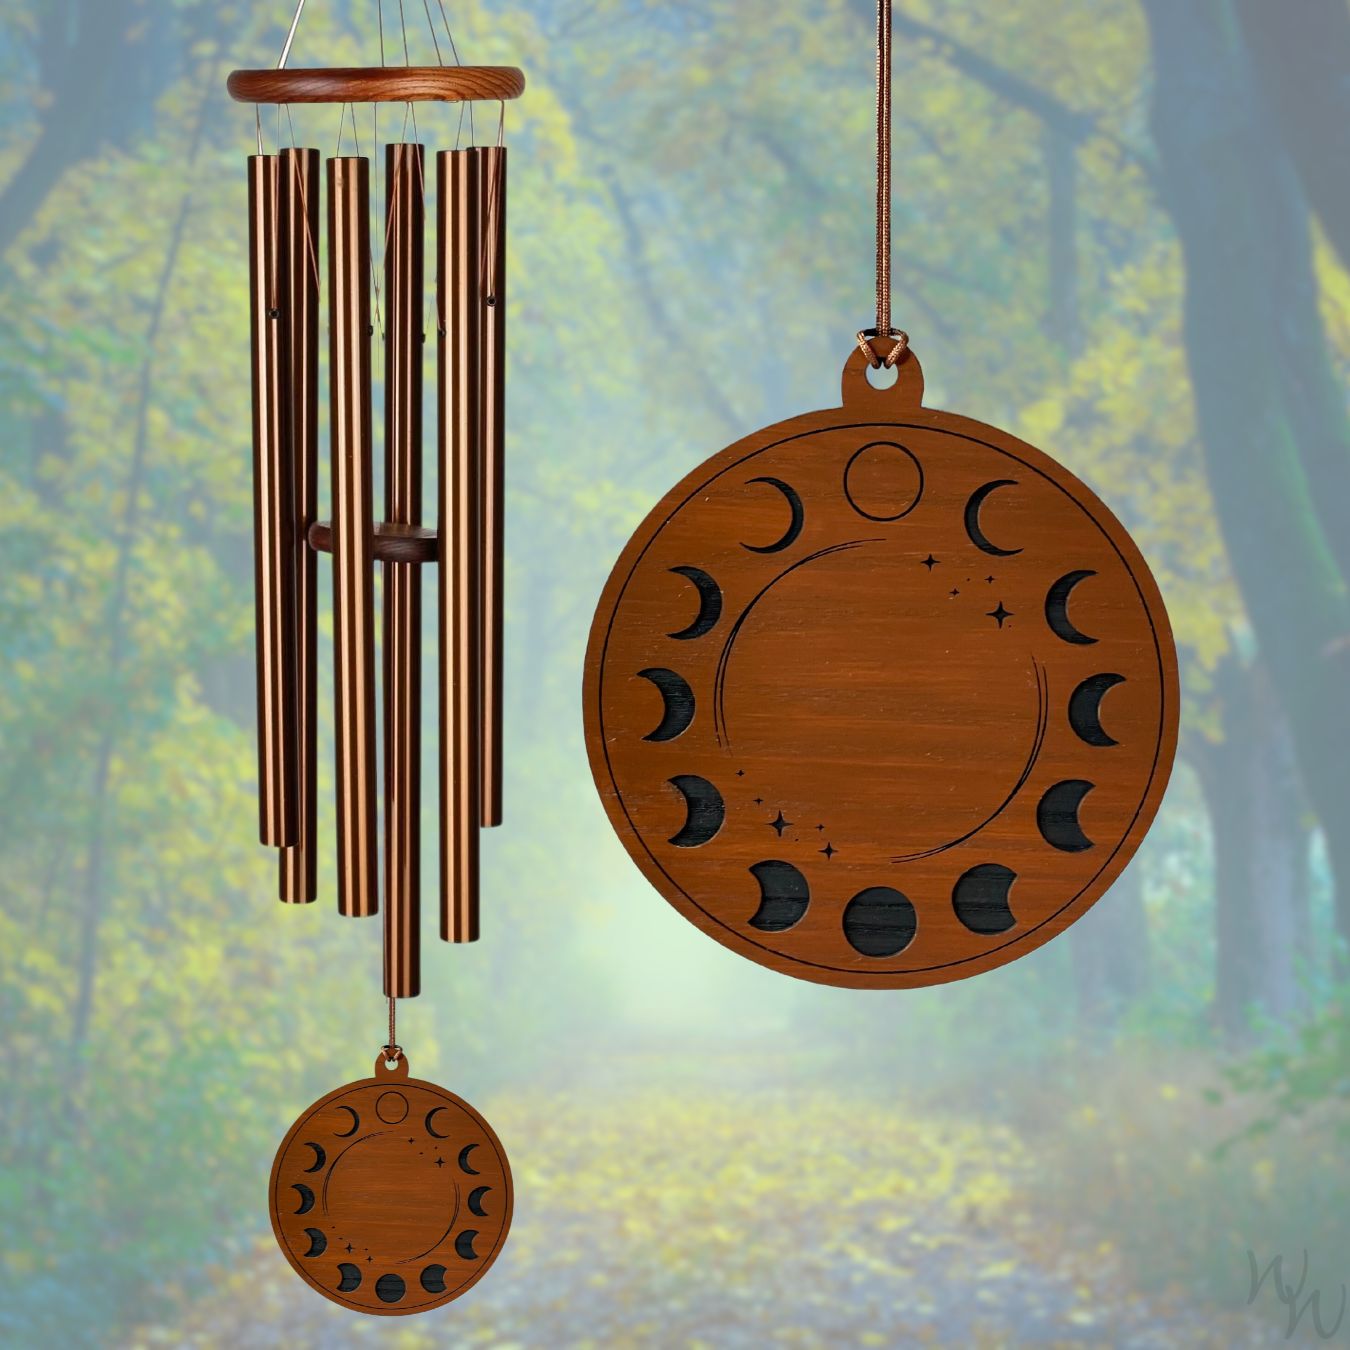 Amazing Grace Bronze 40 Inch Wind Chime - Engravable Moon Phases Sail